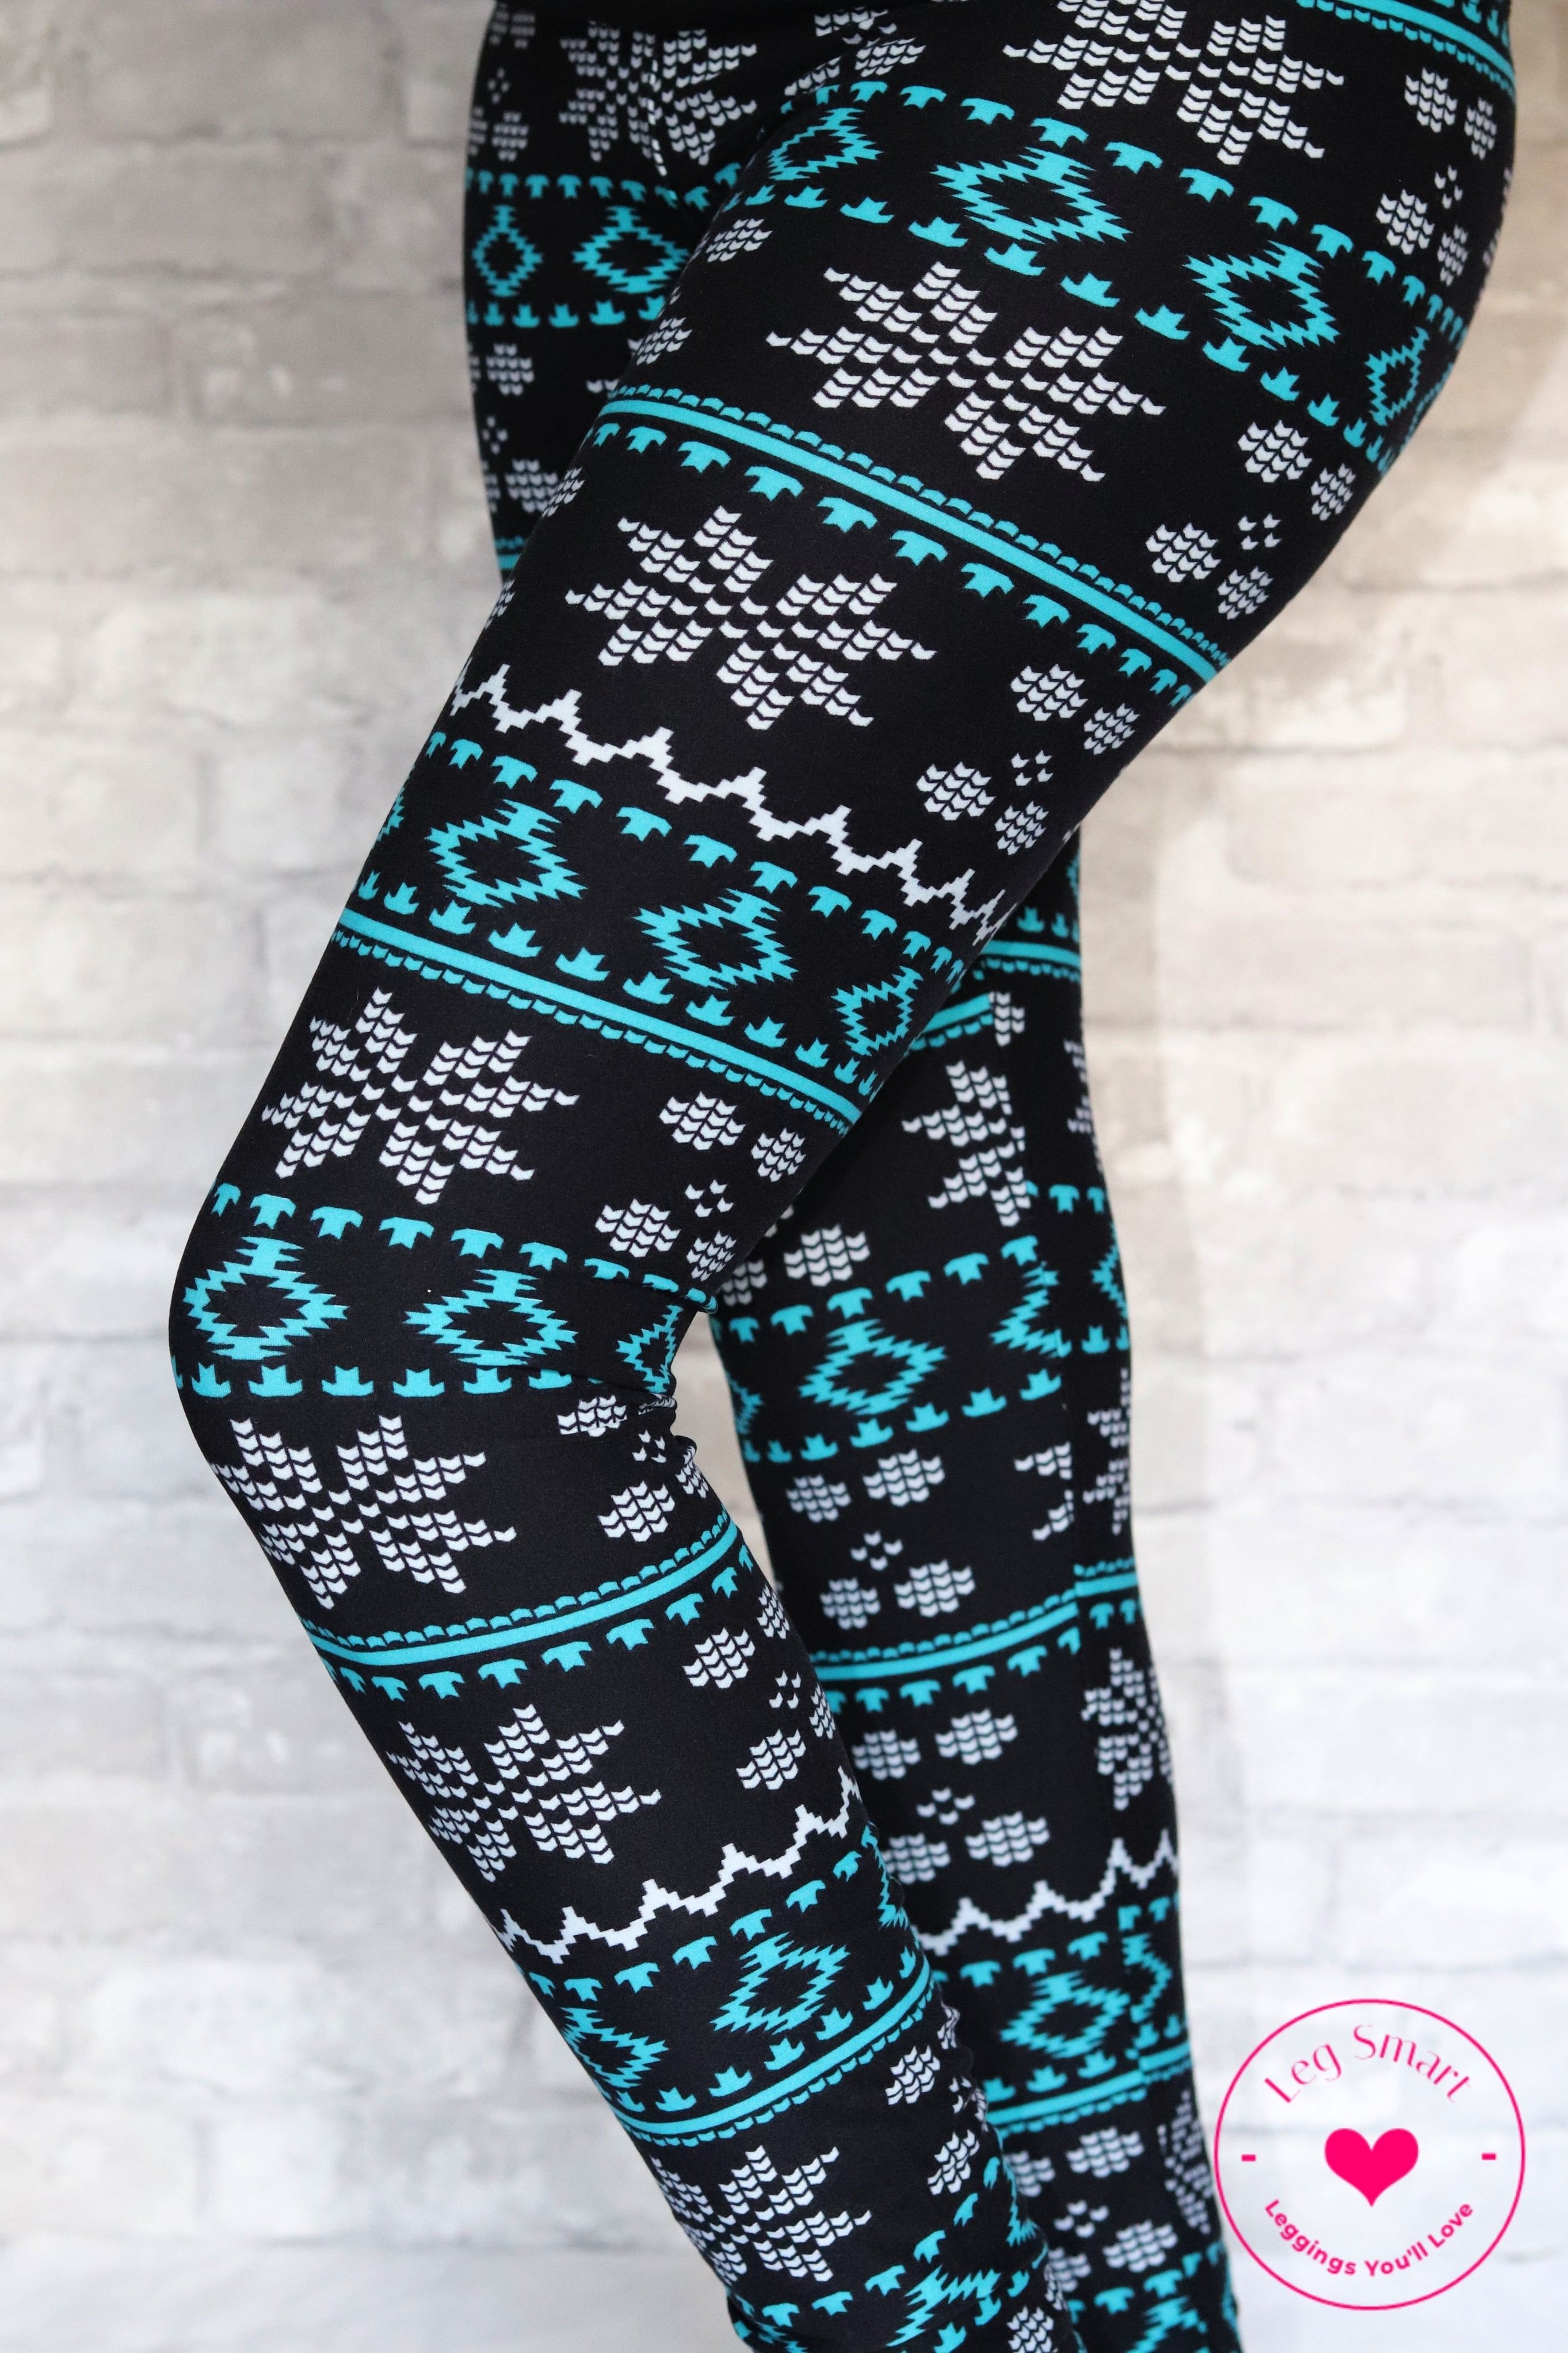  KLL Blue Snowflakes Legging Yoga Pants for Women Dance Athletic  Leggings for Women with Pockets X-Small : Clothing, Shoes & Jewelry